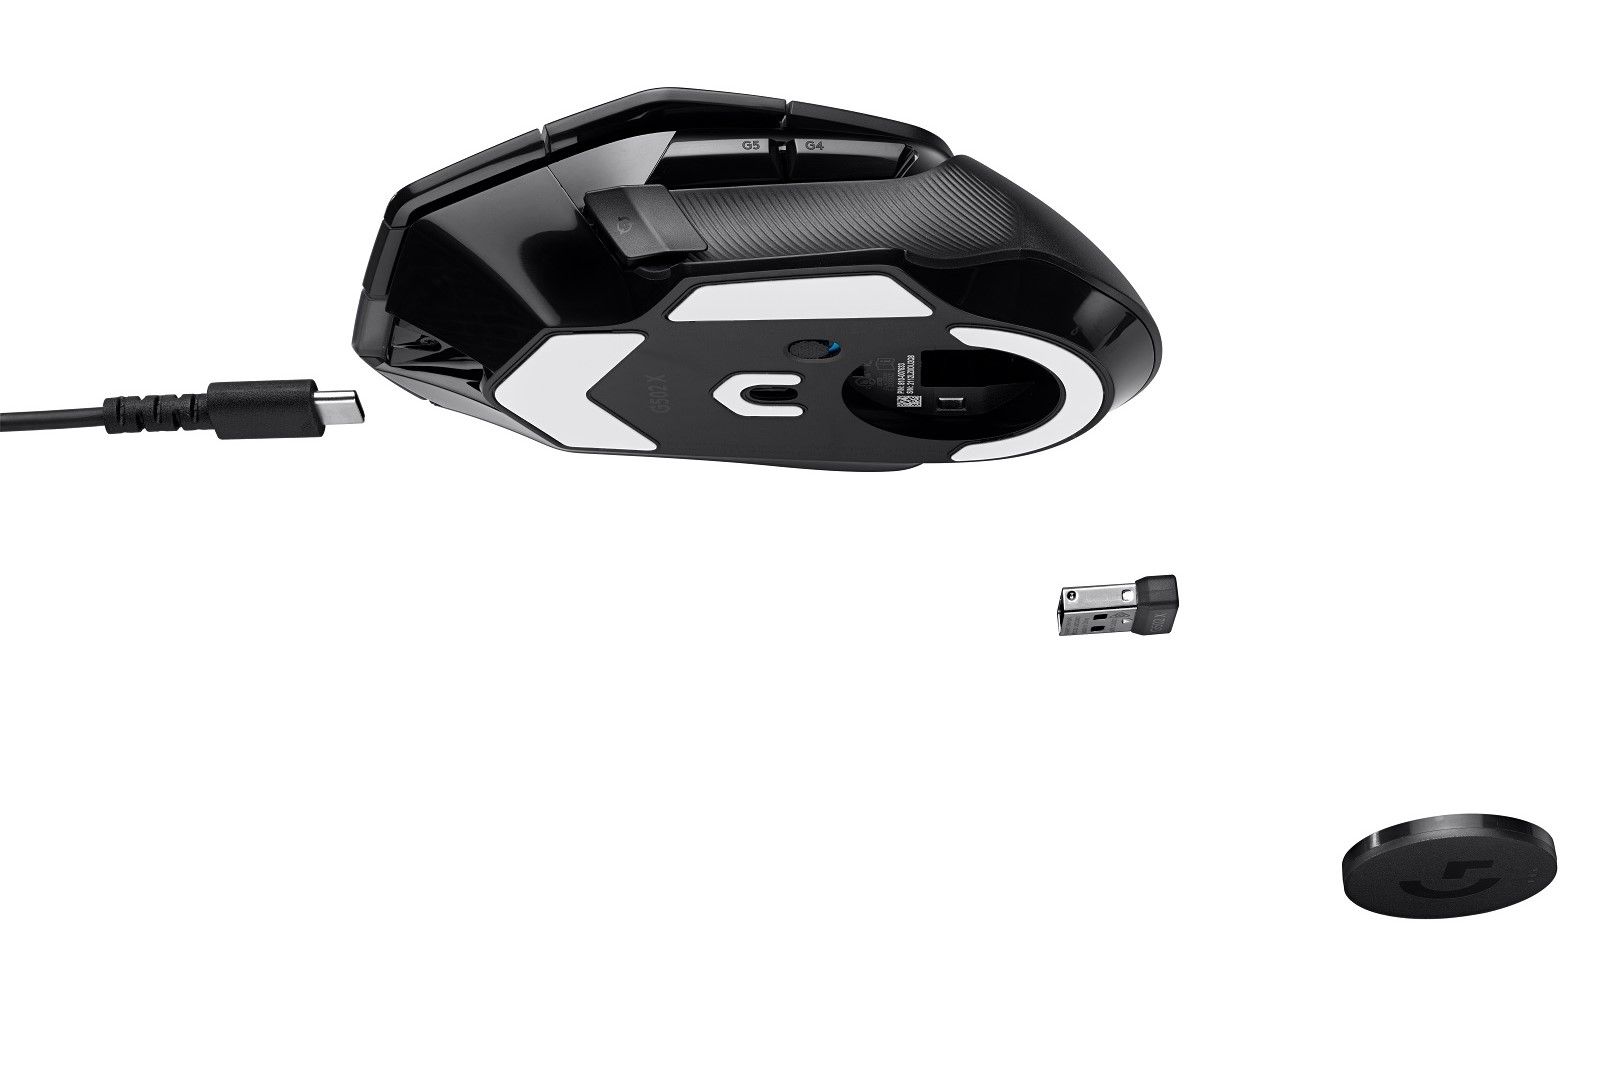 Logitech is finally updating the legendary G502 gaming mouse with three models photo 3